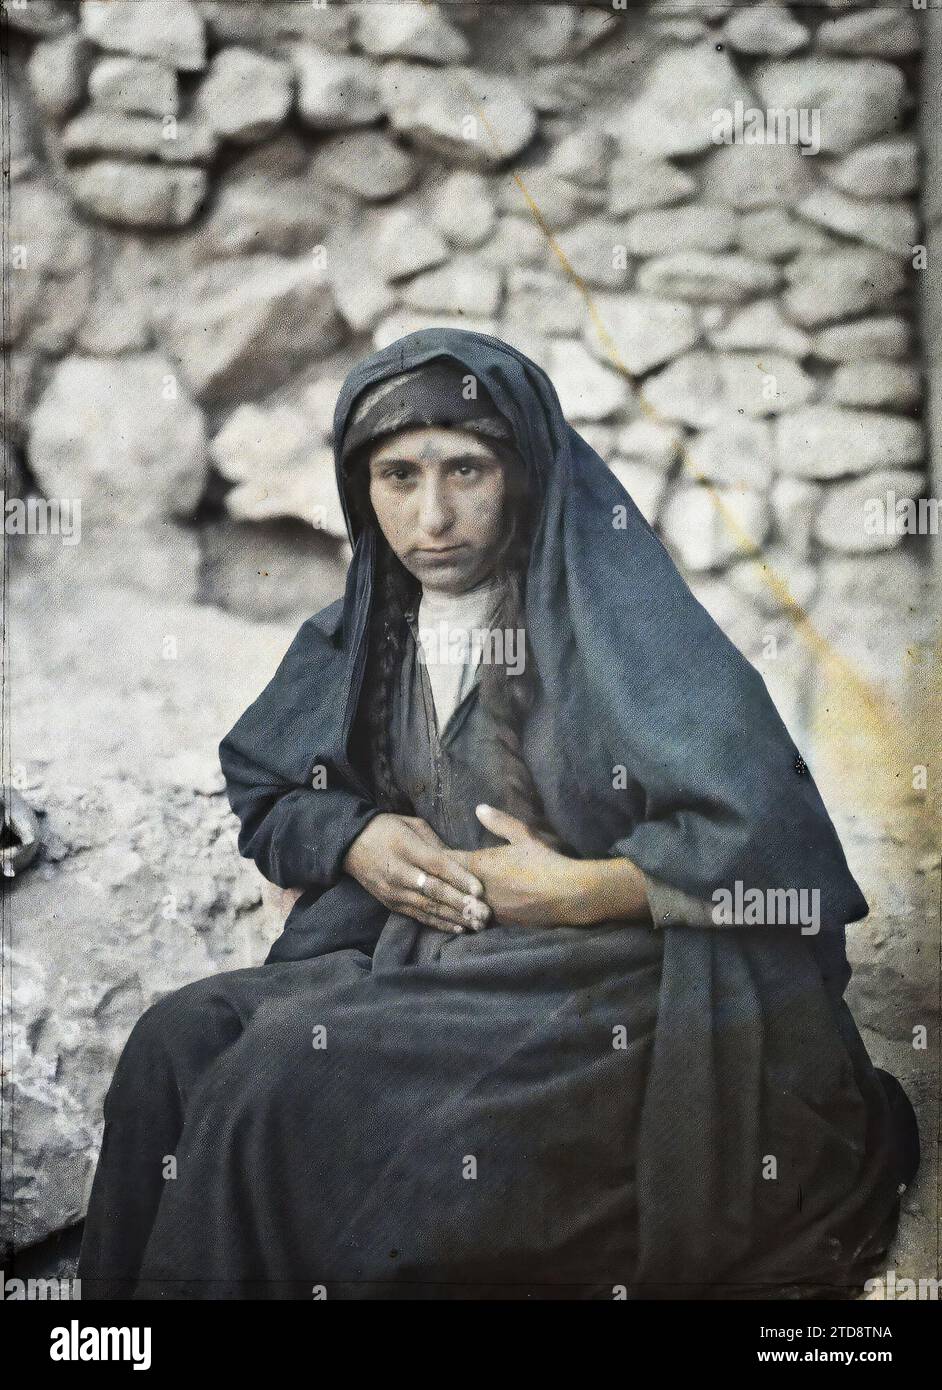 Jerusalem, Israel, Palestine Woman from As-Salt with Indigo Tattoo, Human Beings, Clothing, Society, Religion, Woman, Costume, Ethnic Minority, Bedouin, Islam, Portrait, Tattoo, Jewelry, Hairstyle, Headgear, Palestine, Jerusalem, Israel, Women of El-Salt, Jérusalem, 10/08/1918 - 10/08/1918, Castelnau, Paul, 1918 - Middle East, Egypte, Palestine, Chypre - Paul Castelnau (Photographic section of the army) - (9 January-6 October), Autochrome, photo, Glass, Autochrome, photo, Positive, Vertical, Size 9 x 12 cm Stock Photo